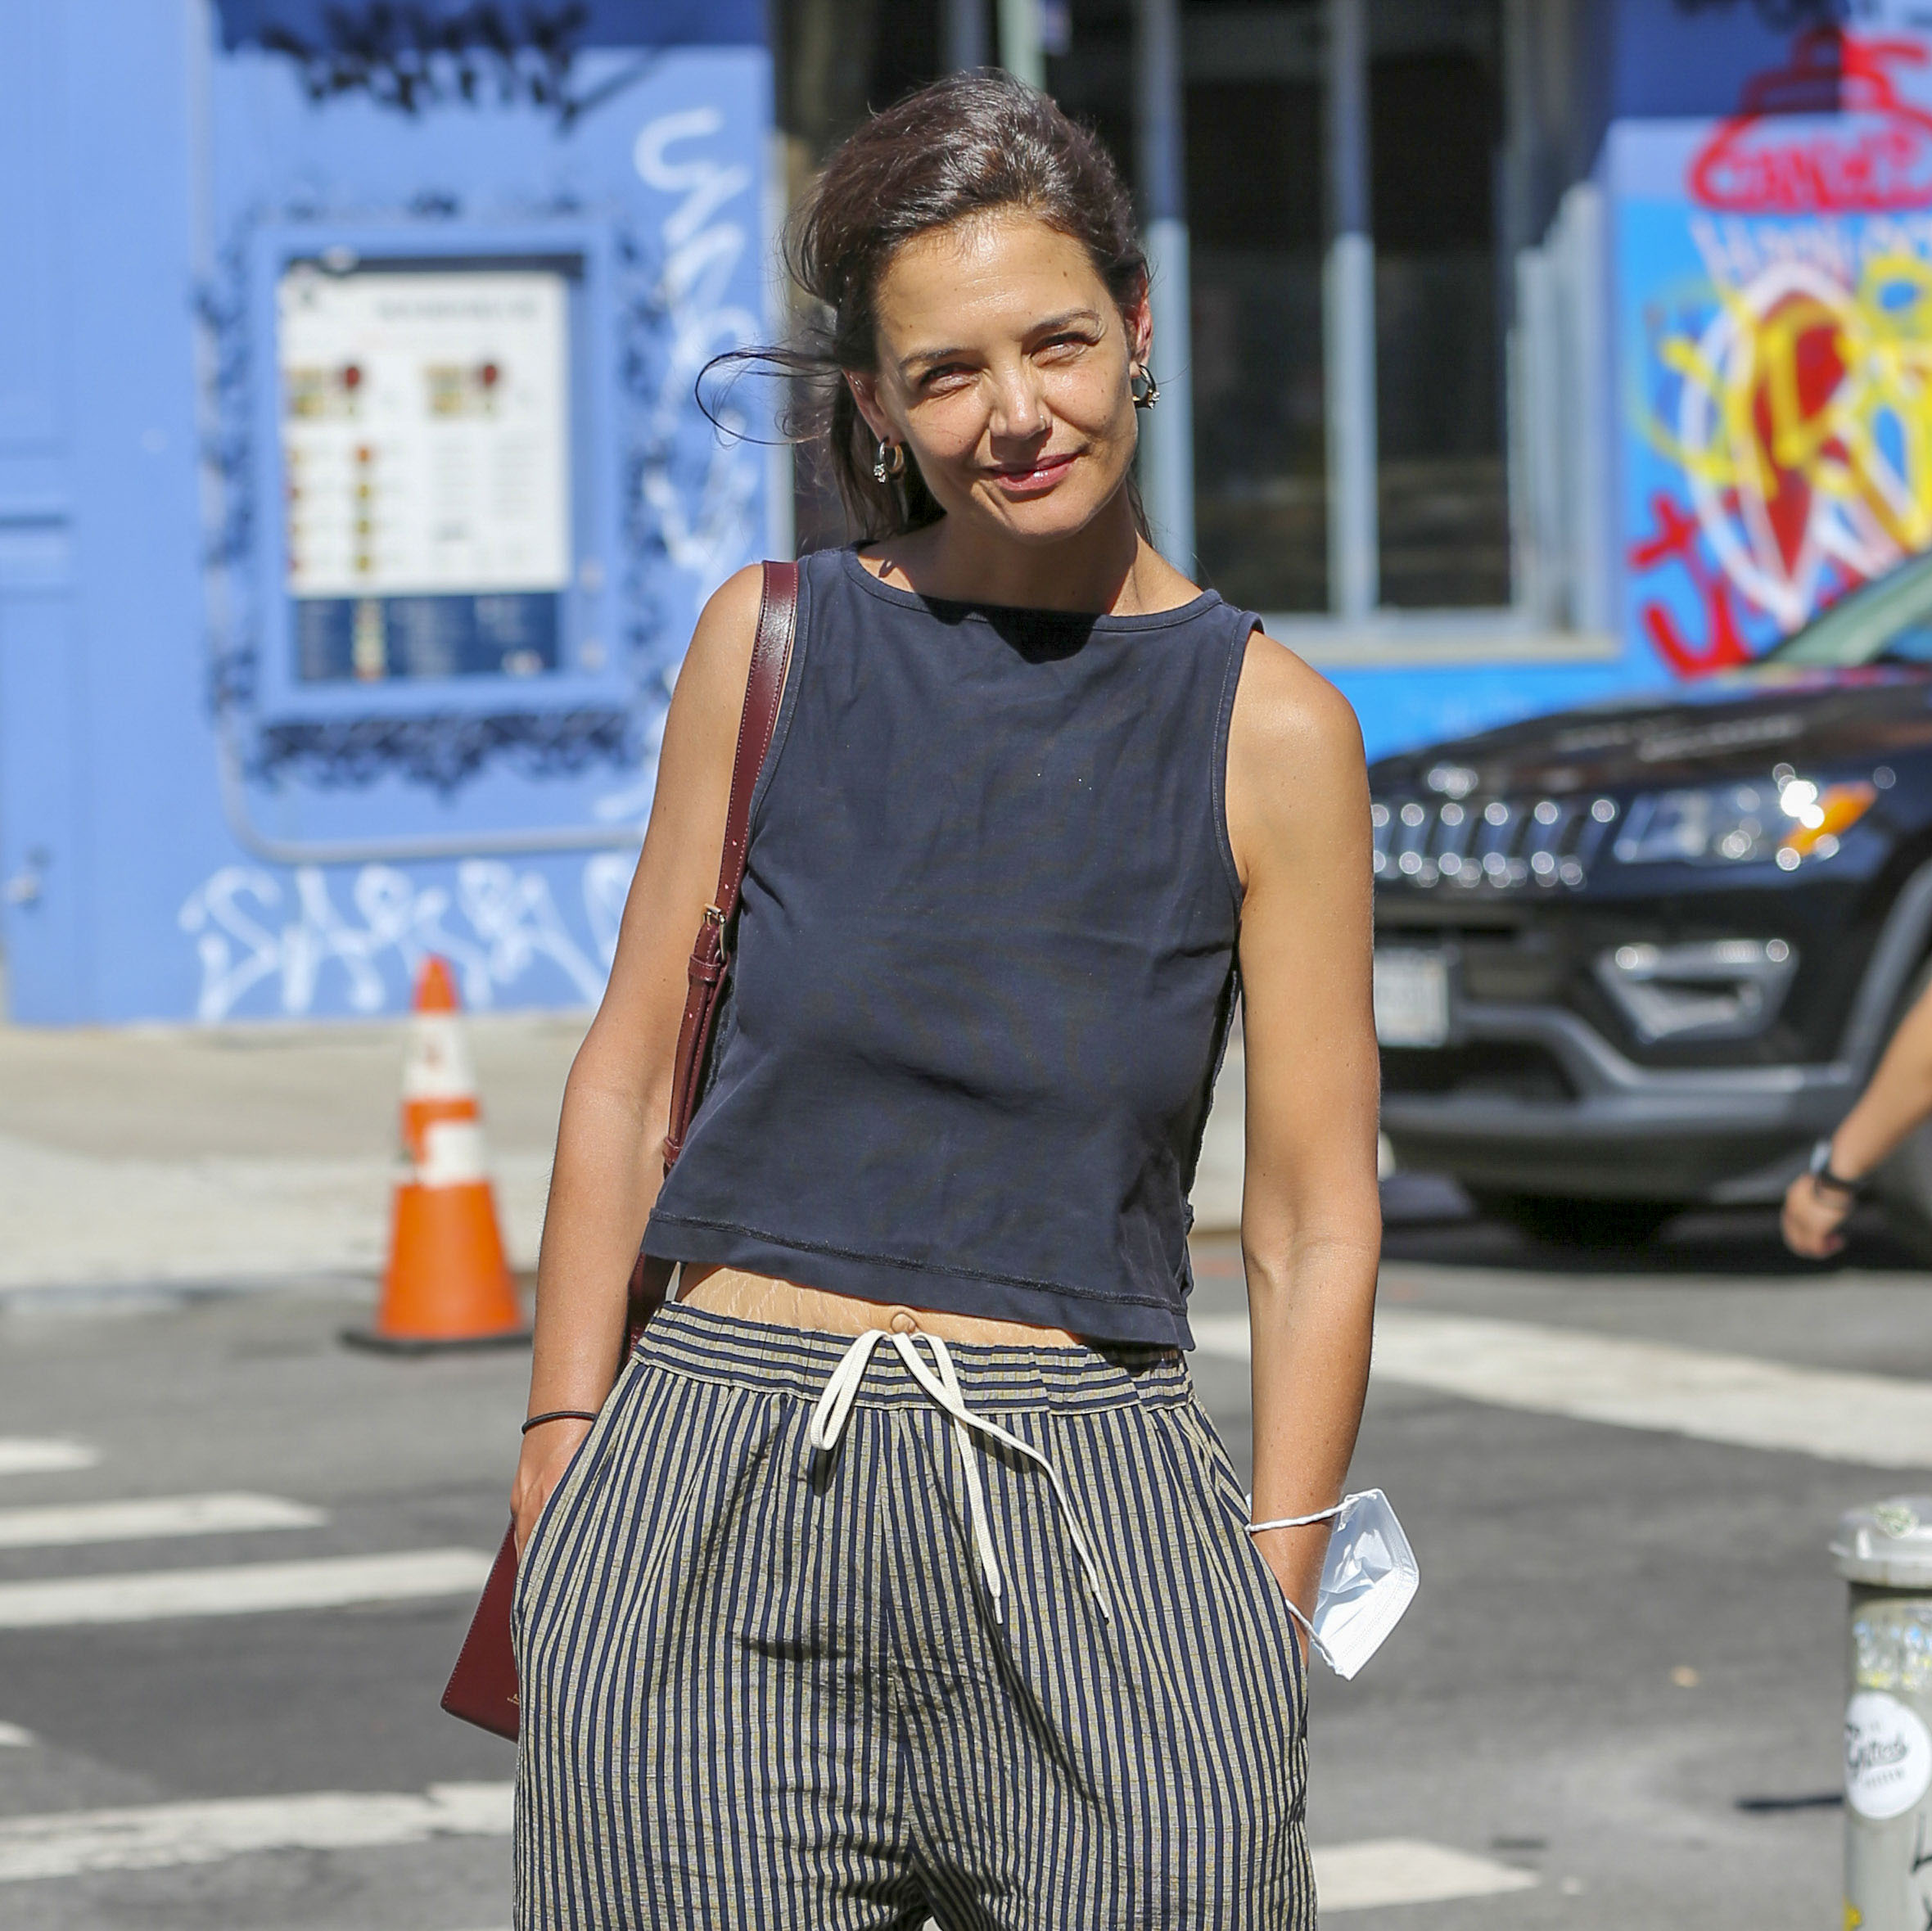 With the simplicity that characterizes her, Katie Holmes chose striped pants with a drawstring at the waist and a sleeveless blouse to walk through Manhattan